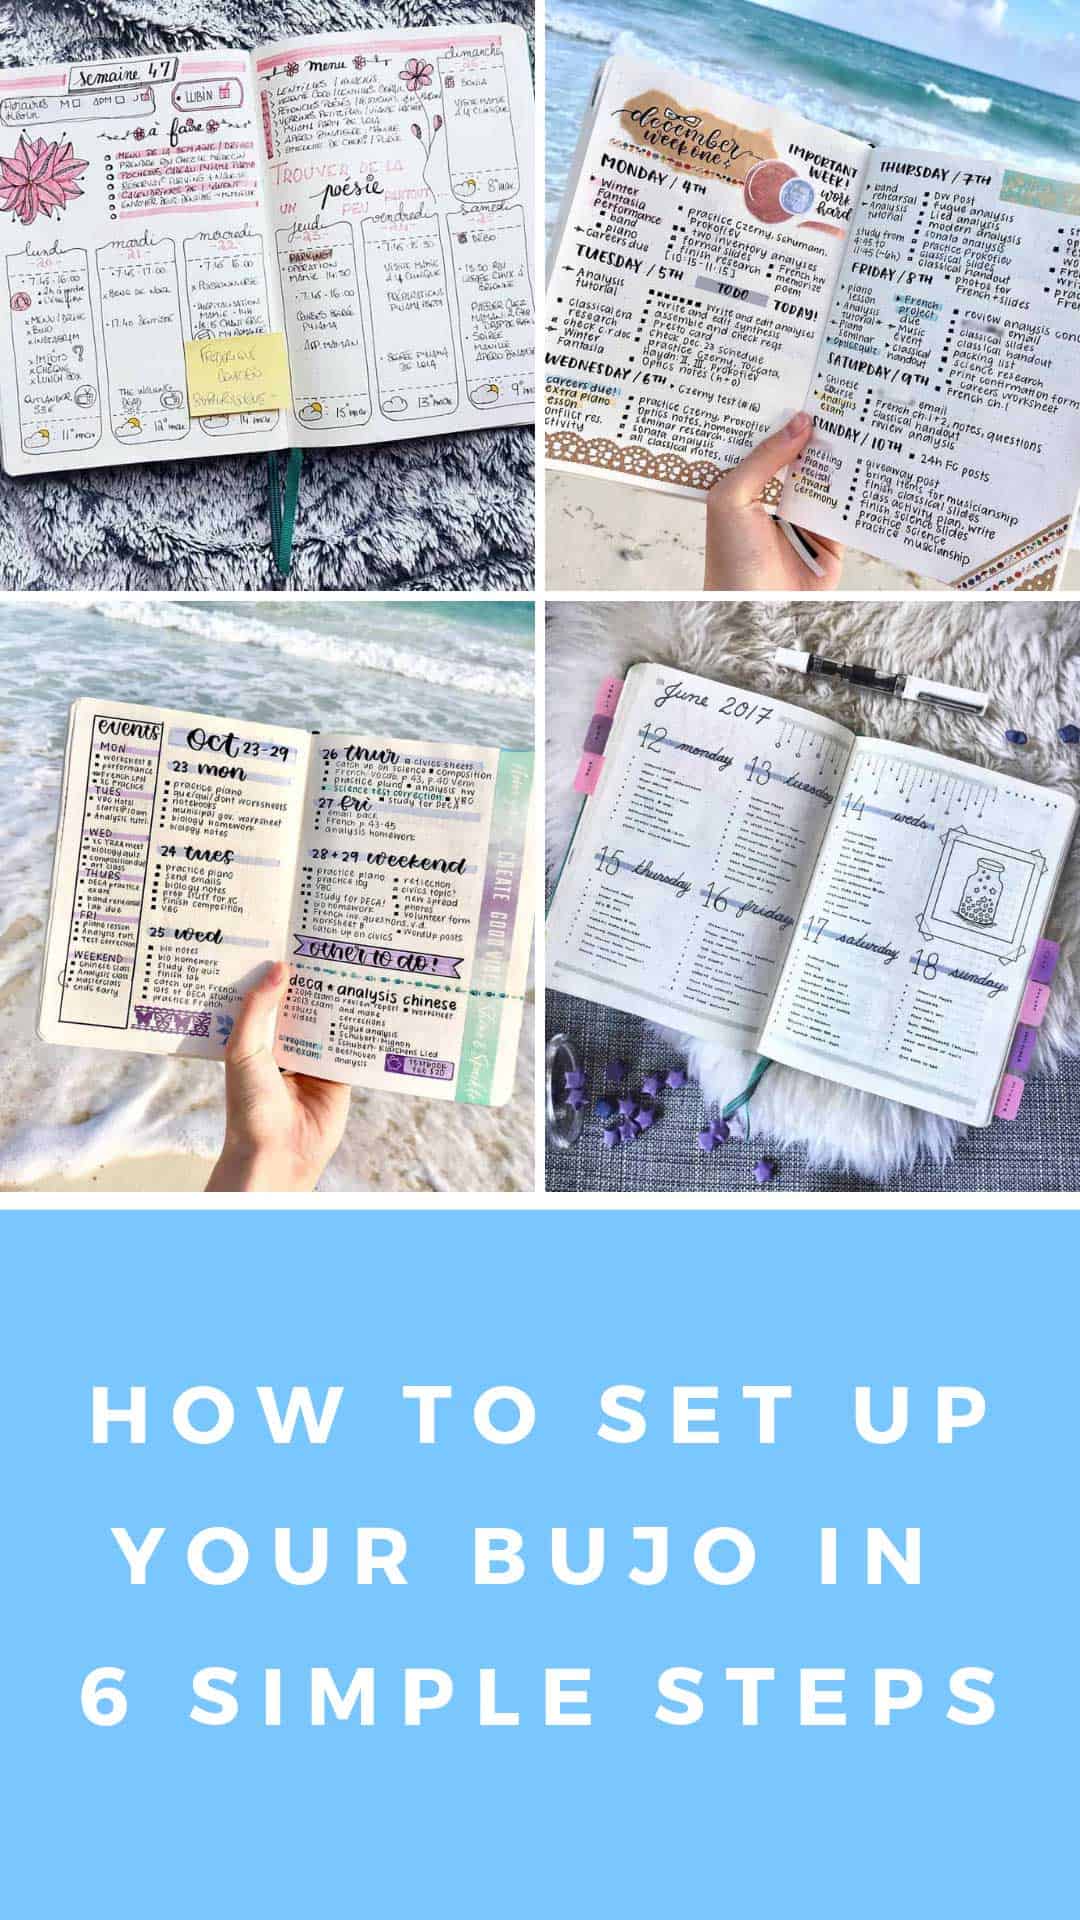 If you're just getting started this simple bullet journal setup guide has everything you need to convert a notebook into a super productive BUJO! #bulletjournal